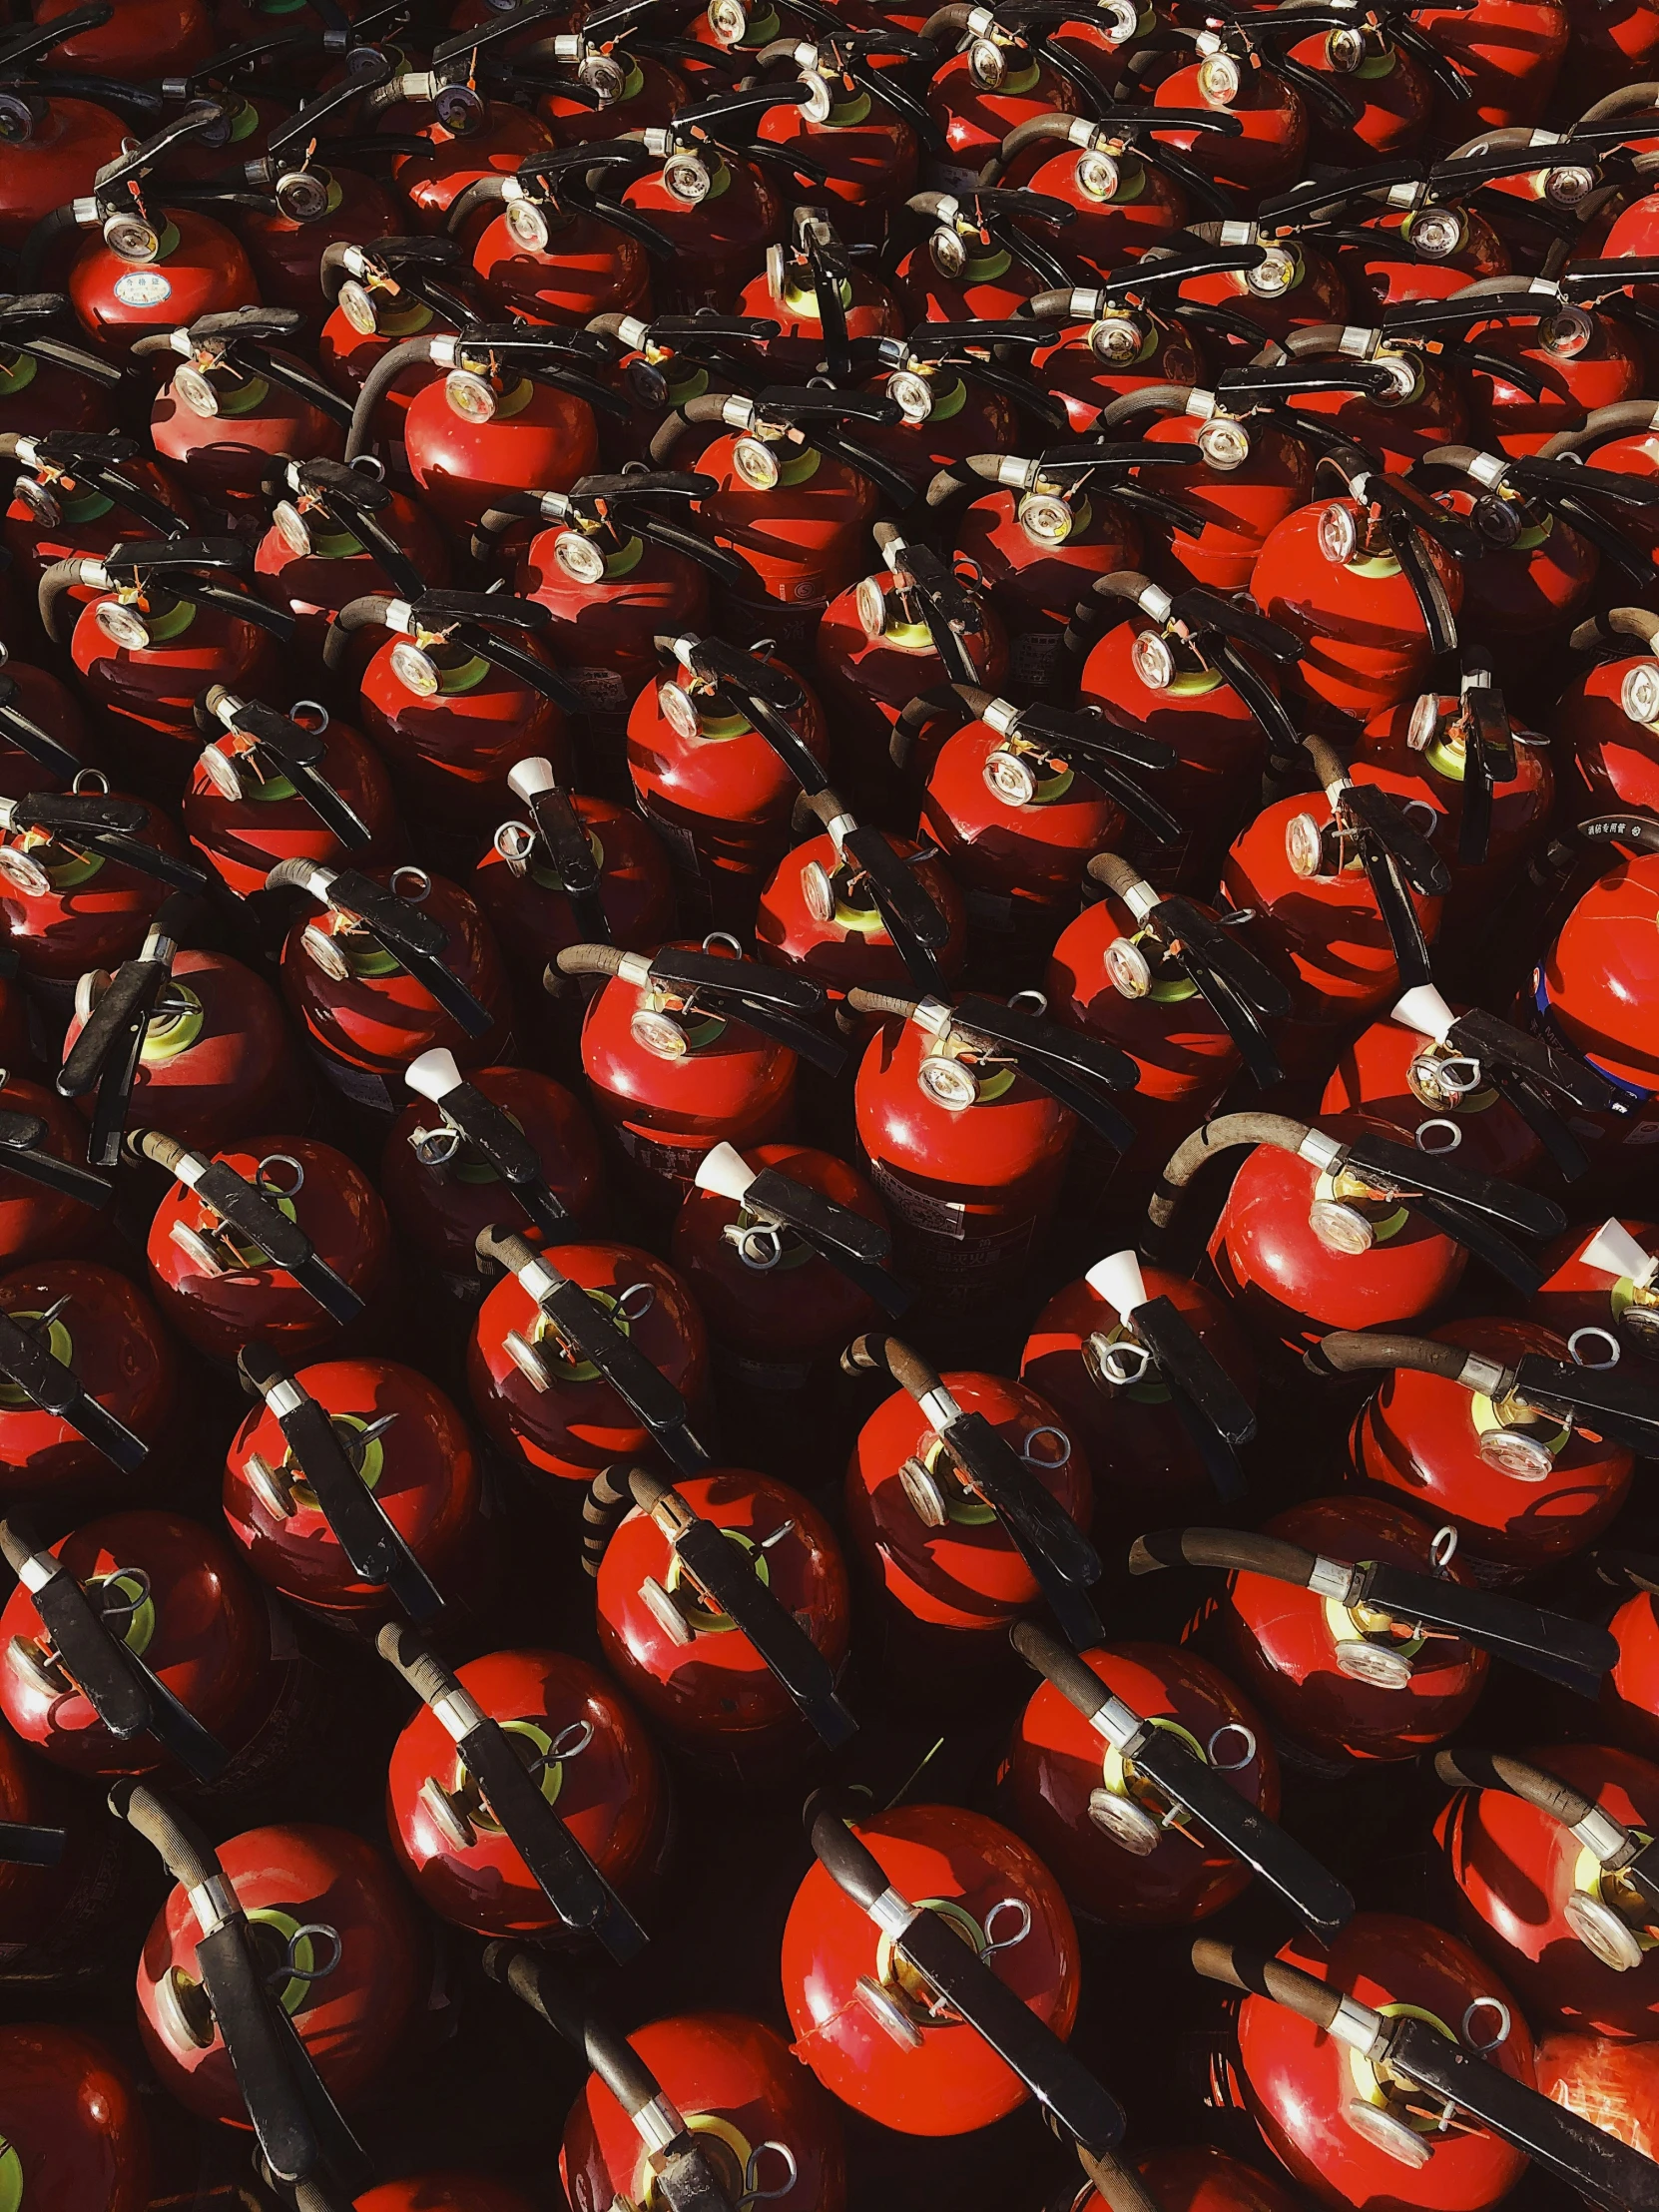 rows of red and black fire hydrants are shown in a pattern